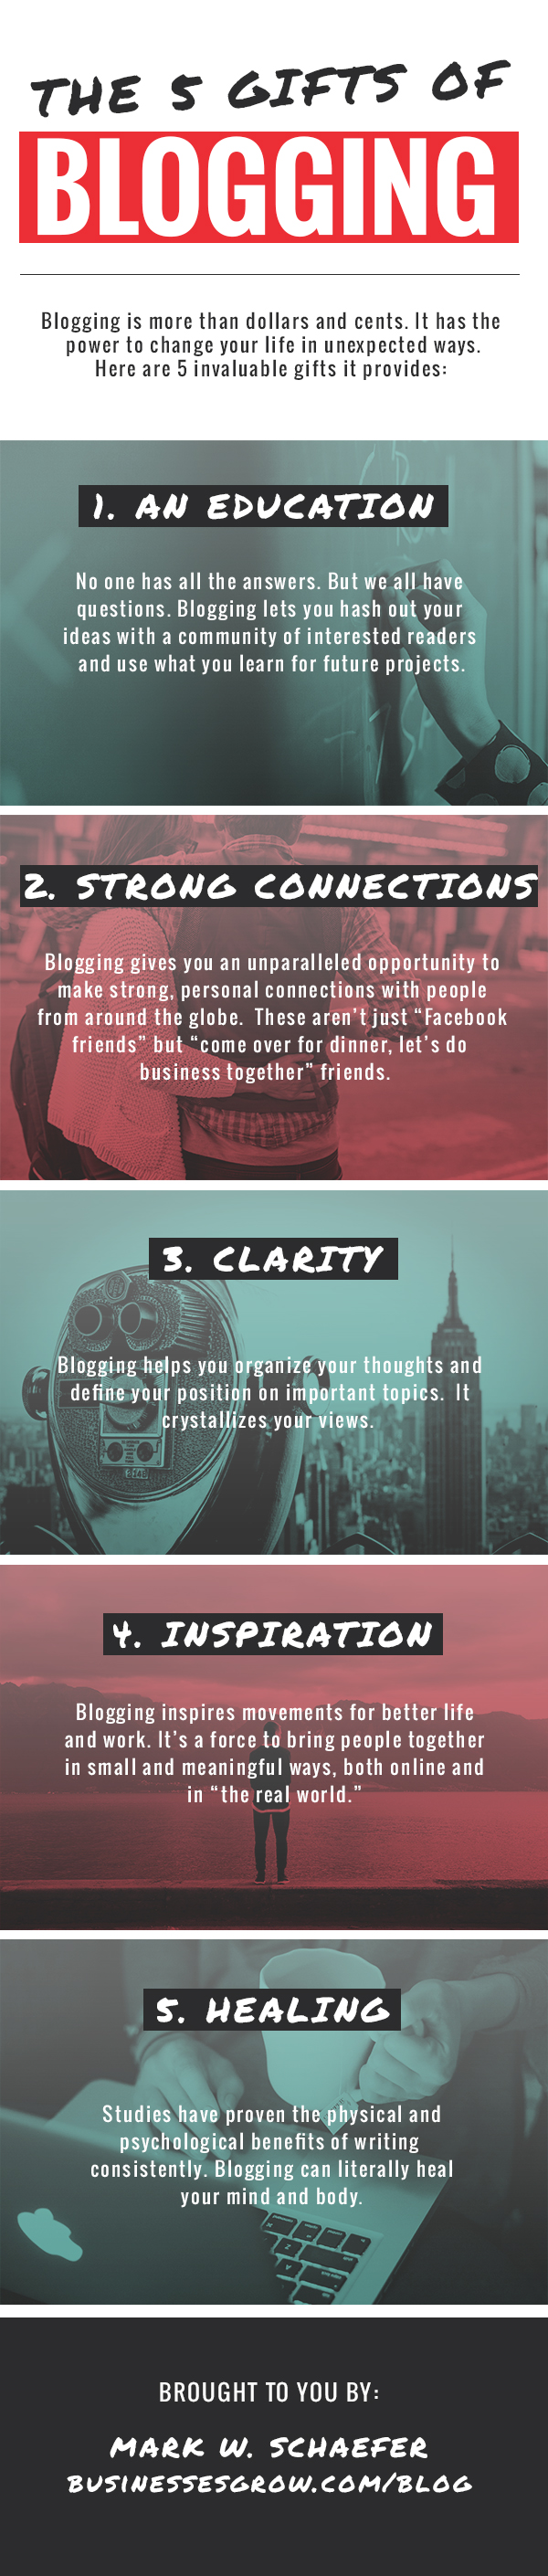 gifts of blogging